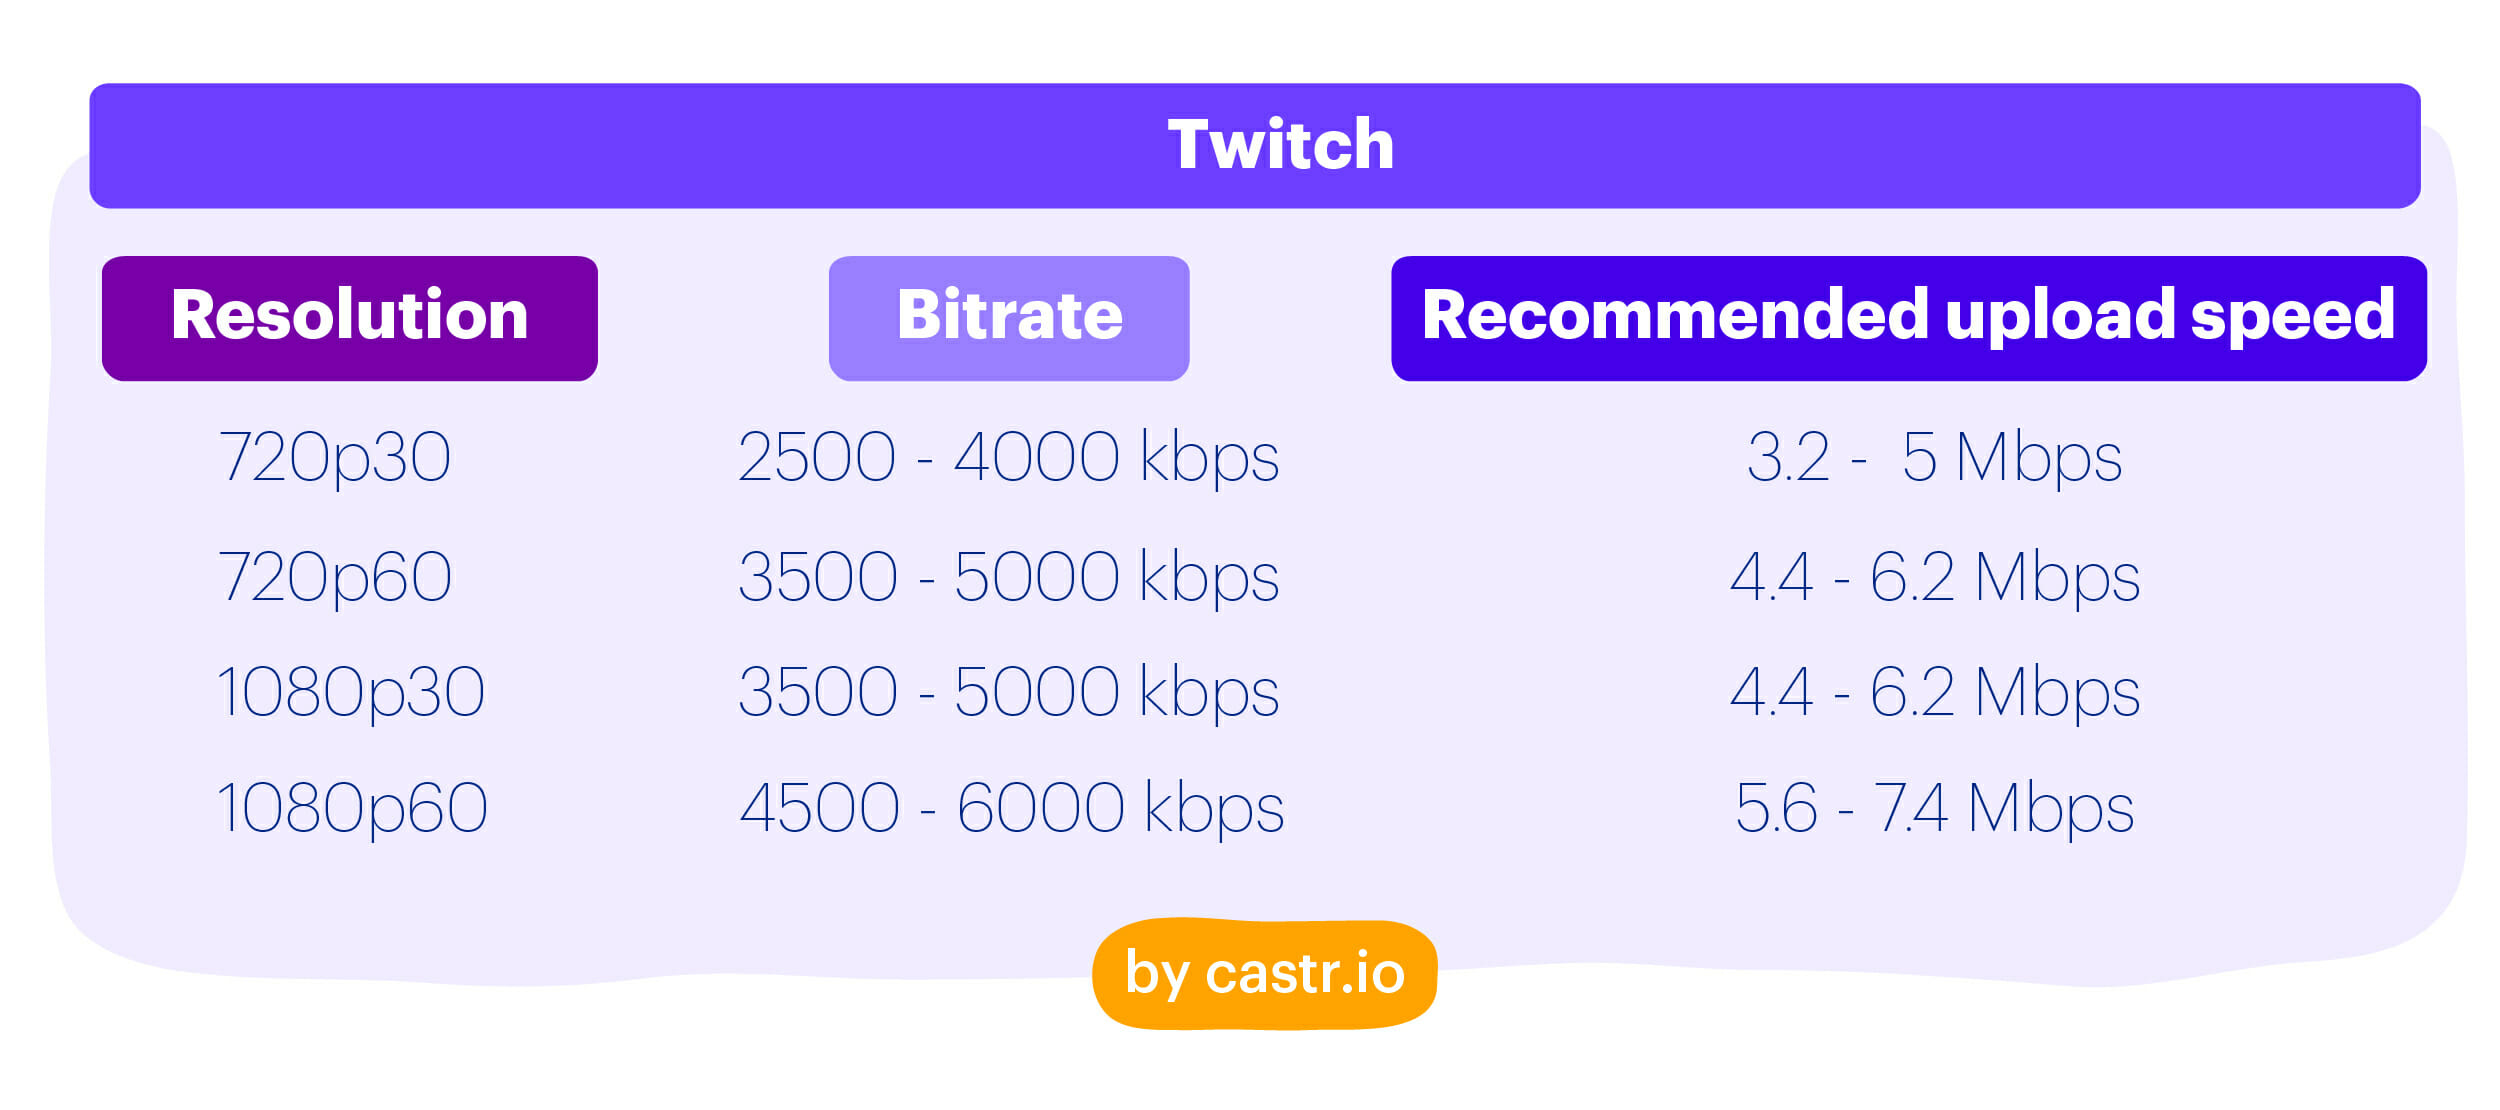 The Best Upload Speed for Livestreaming